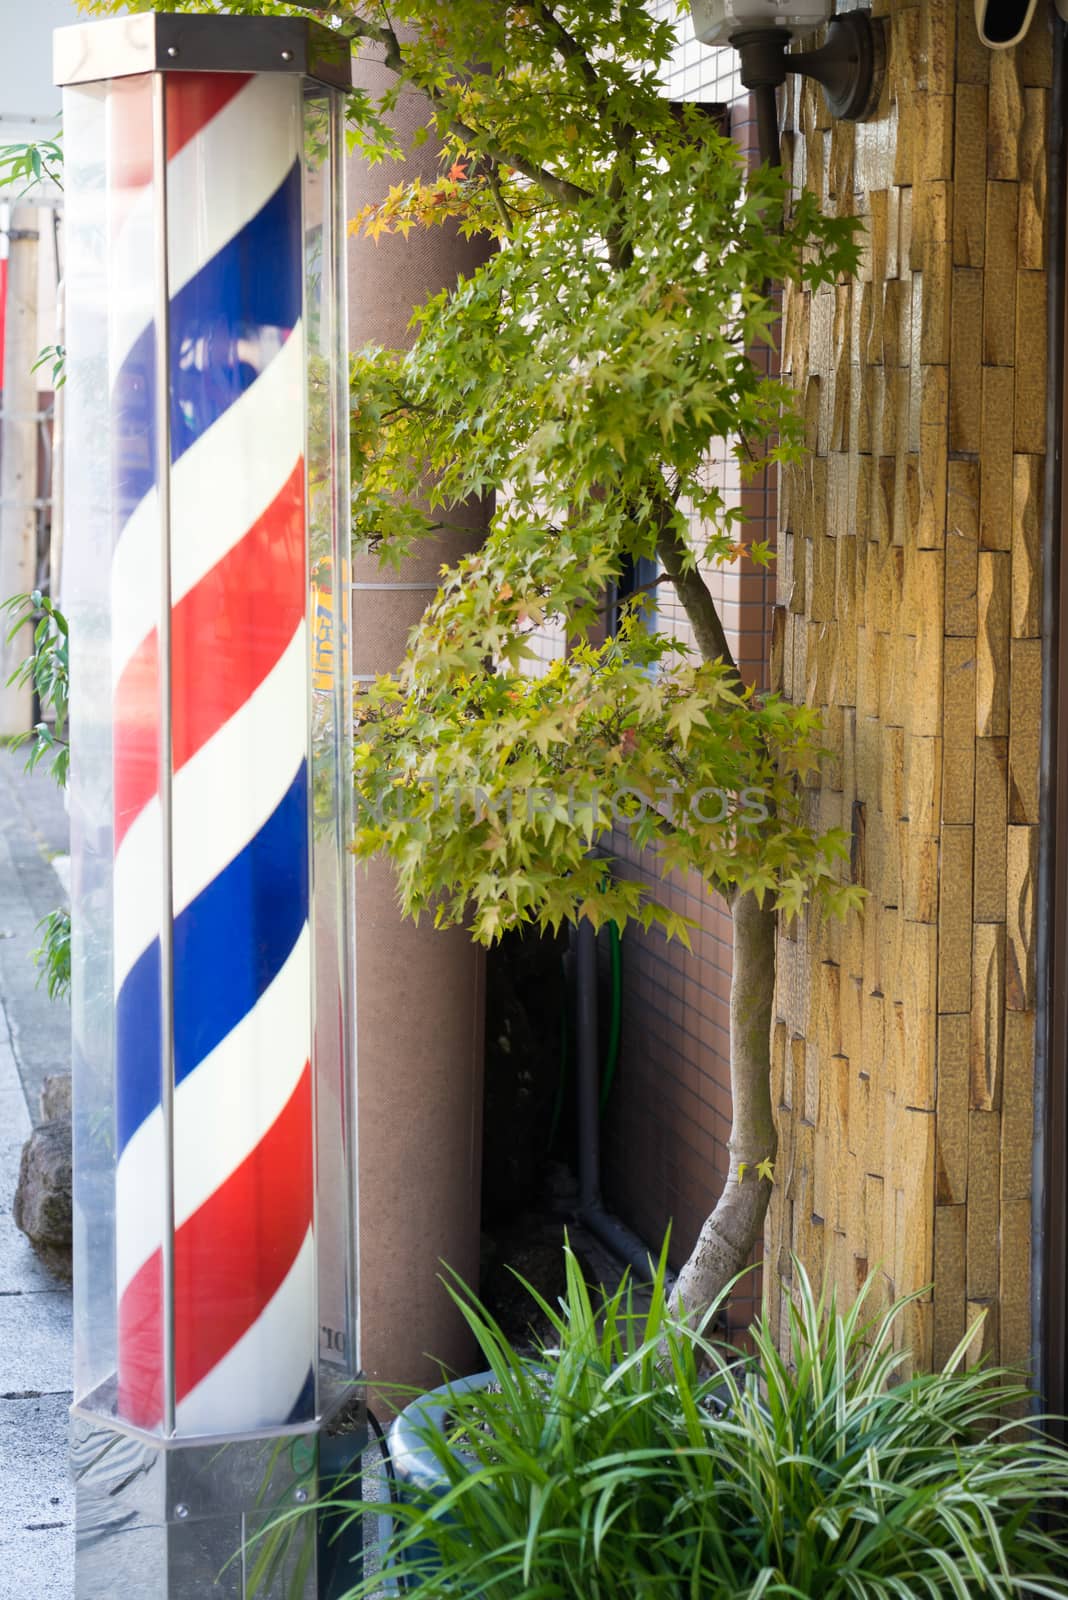 The symbol of the hair salon located in front of store with japanese trees